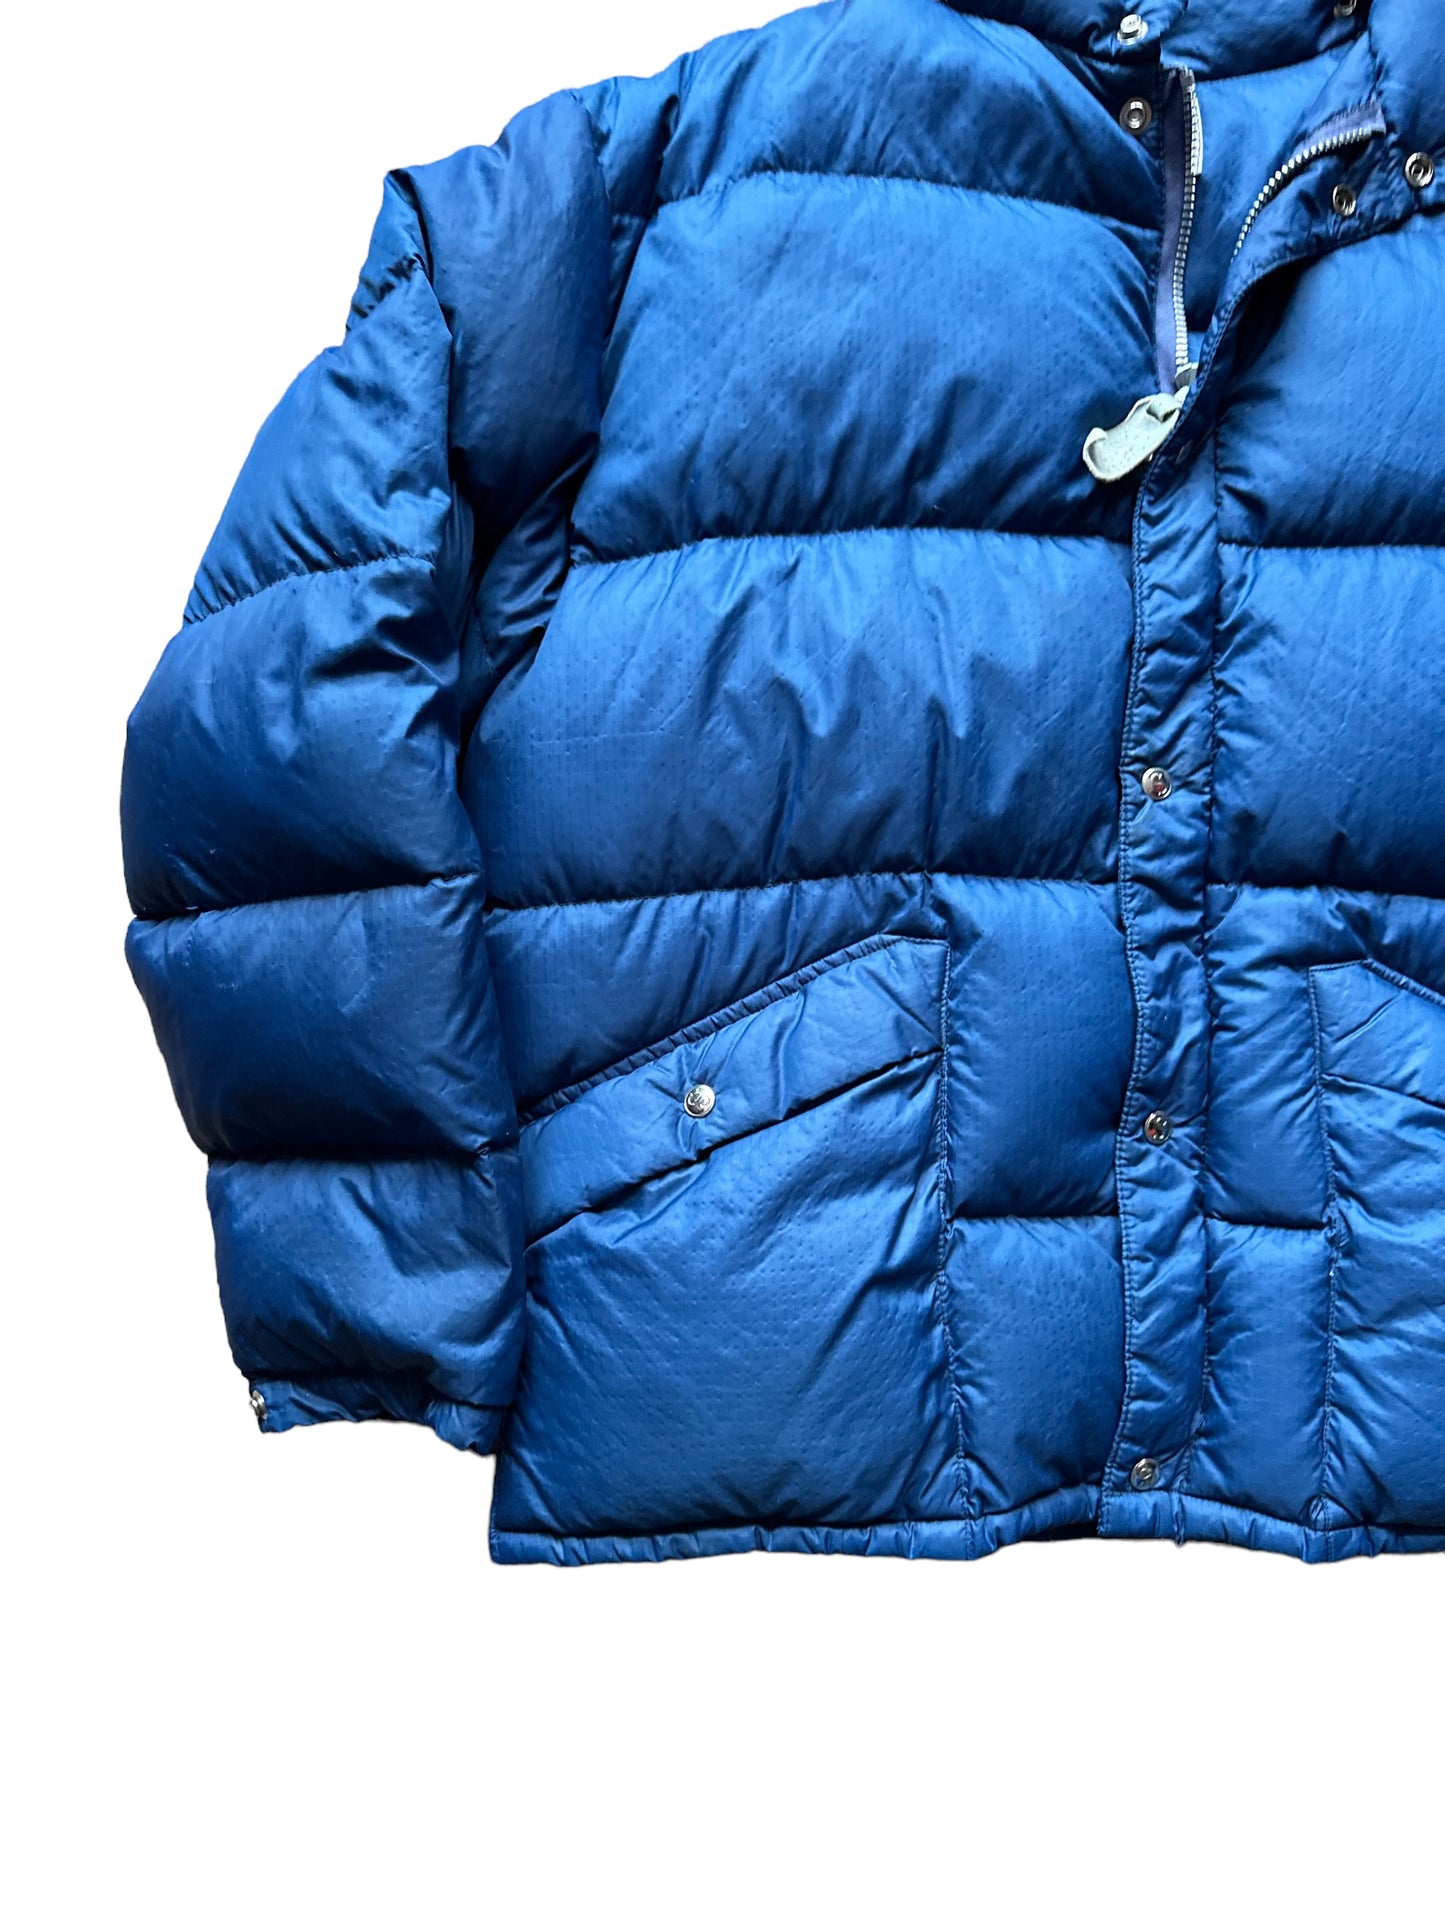 Front Right View of Vintage Sprung Blue Goose Down Puffer Jacket SZ XL | Vintage Puffer Jacket Seattle | Barn Owl Vintage Seattle